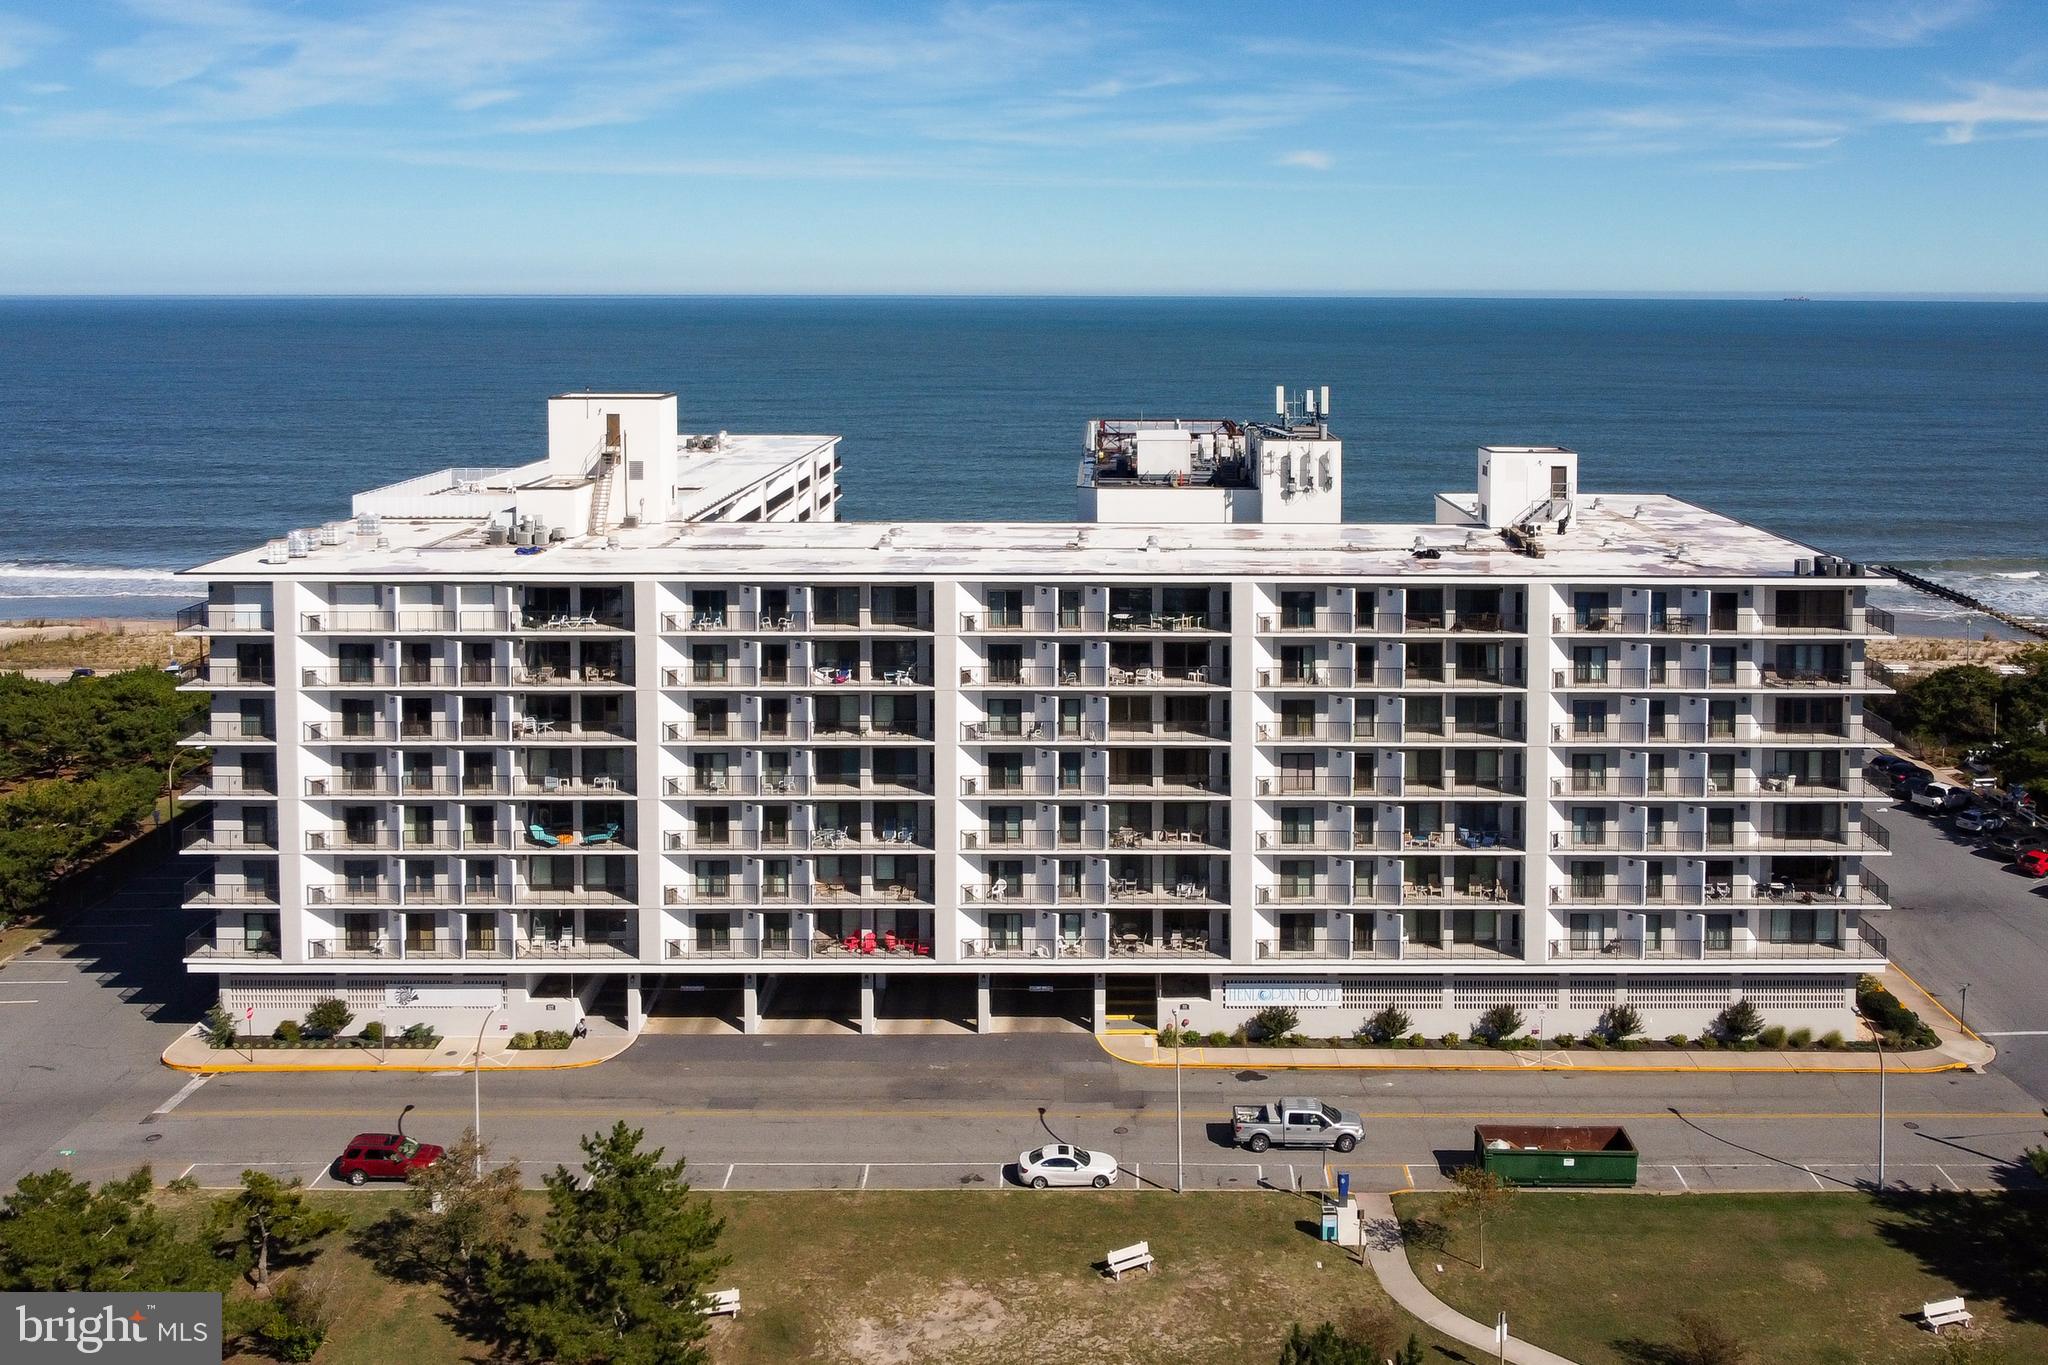 PERFECT BEACH GETAWAY! Don't miss this 2 bedroom, 2 bath condo directly on Rehoboth Beach Boardwalk!  Completely renovated, featuring an open floor plan, new flooring, new kitchen, new bathrooms, multiple balconies, and ocean views. Use as your summer home or rent it out! Walk to all the Rehoboth Beach attractions and the beach!